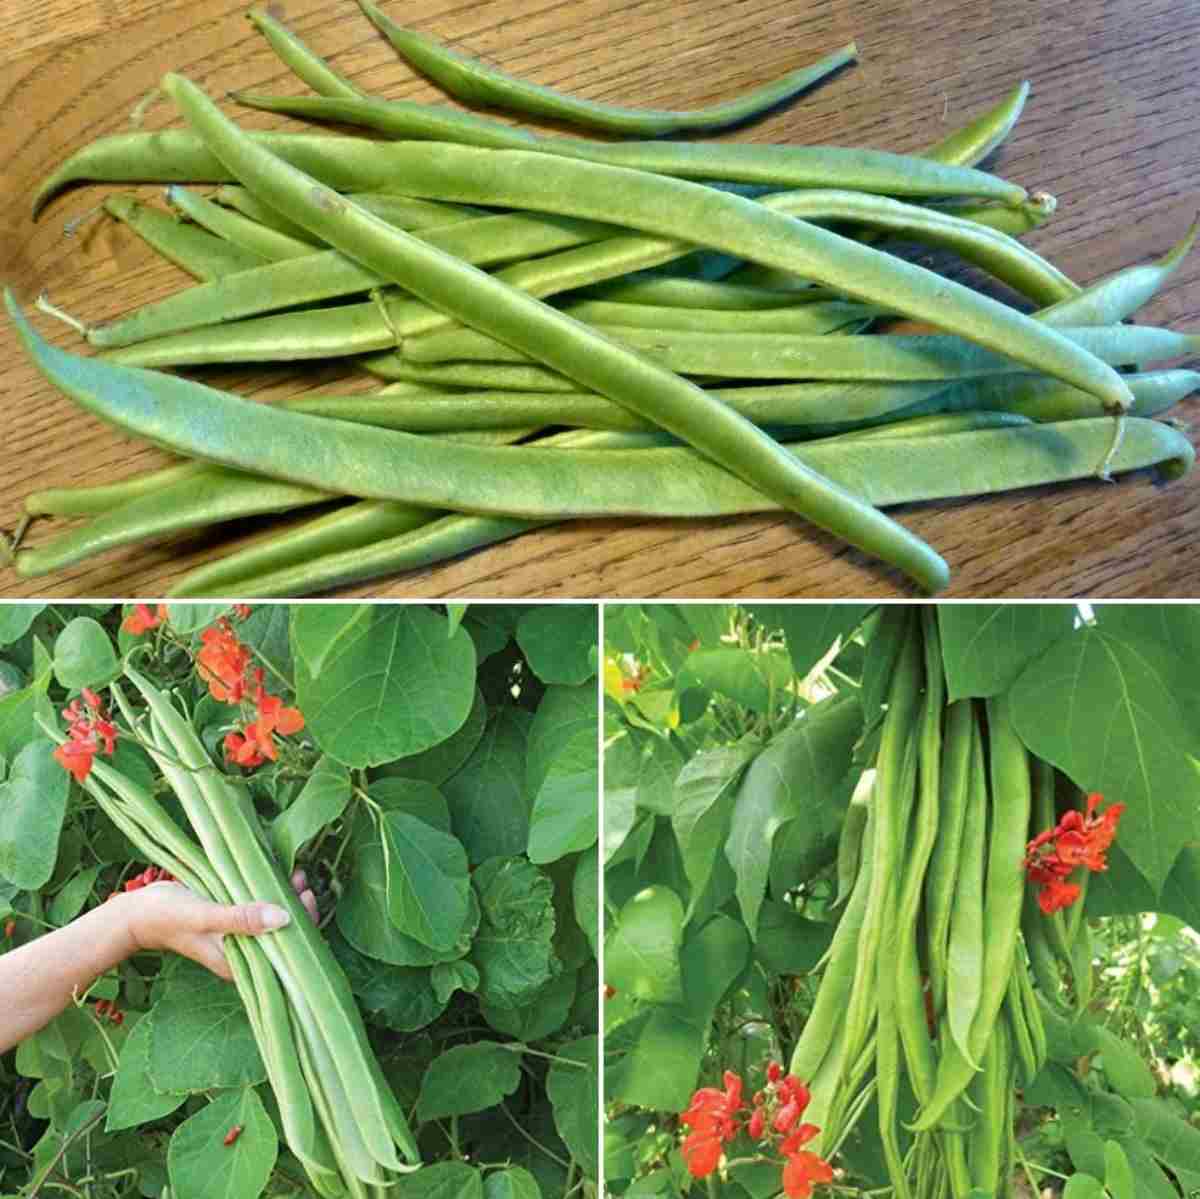 The process of growing Runner beans in pots.